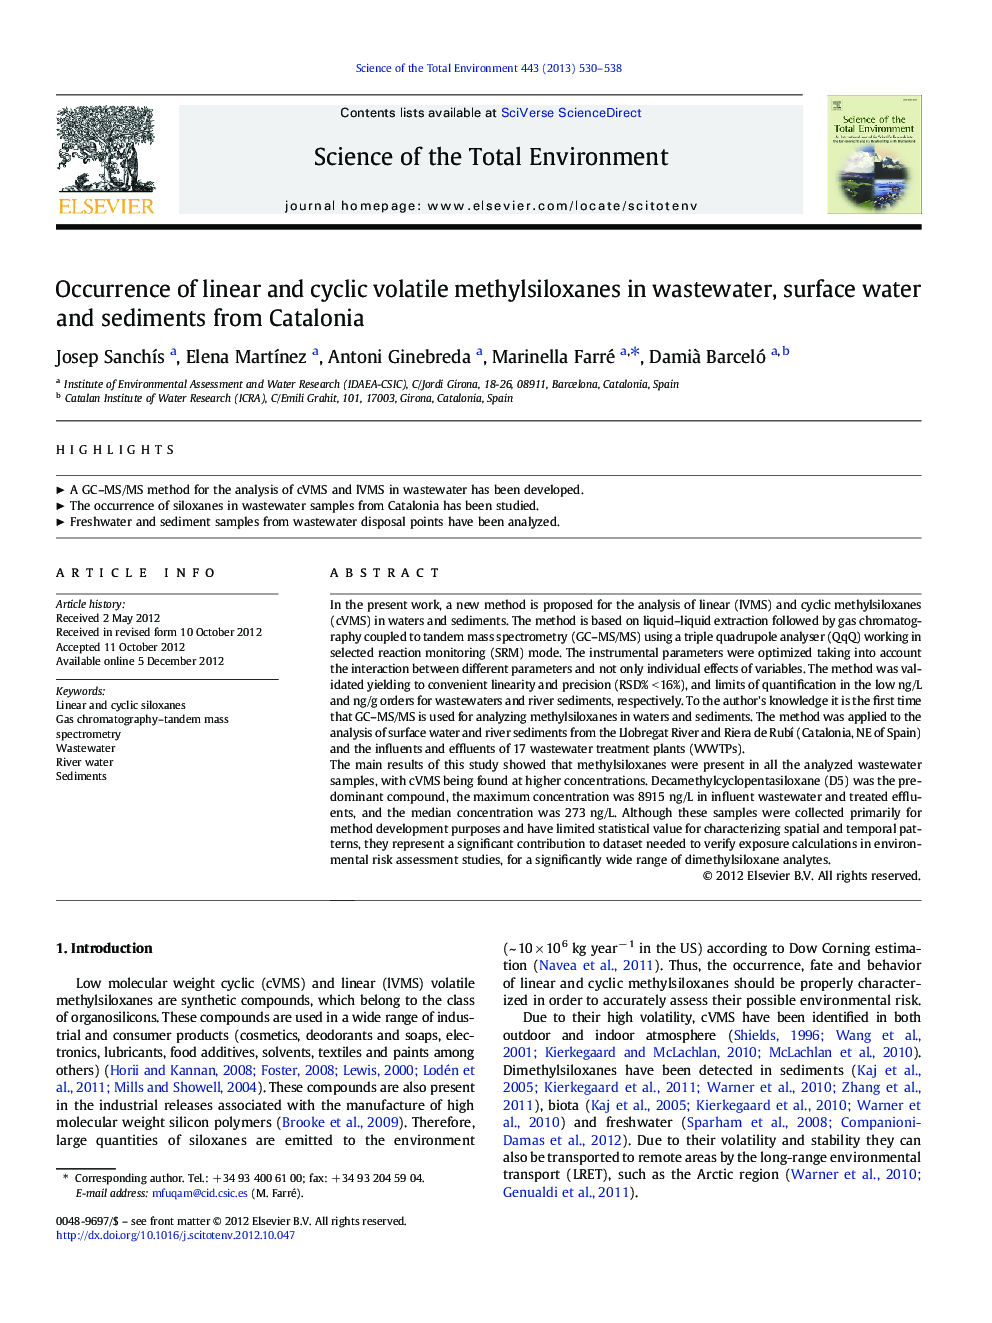 Occurrence of linear and cyclic volatile methylsiloxanes in wastewater, surface water and sediments from Catalonia